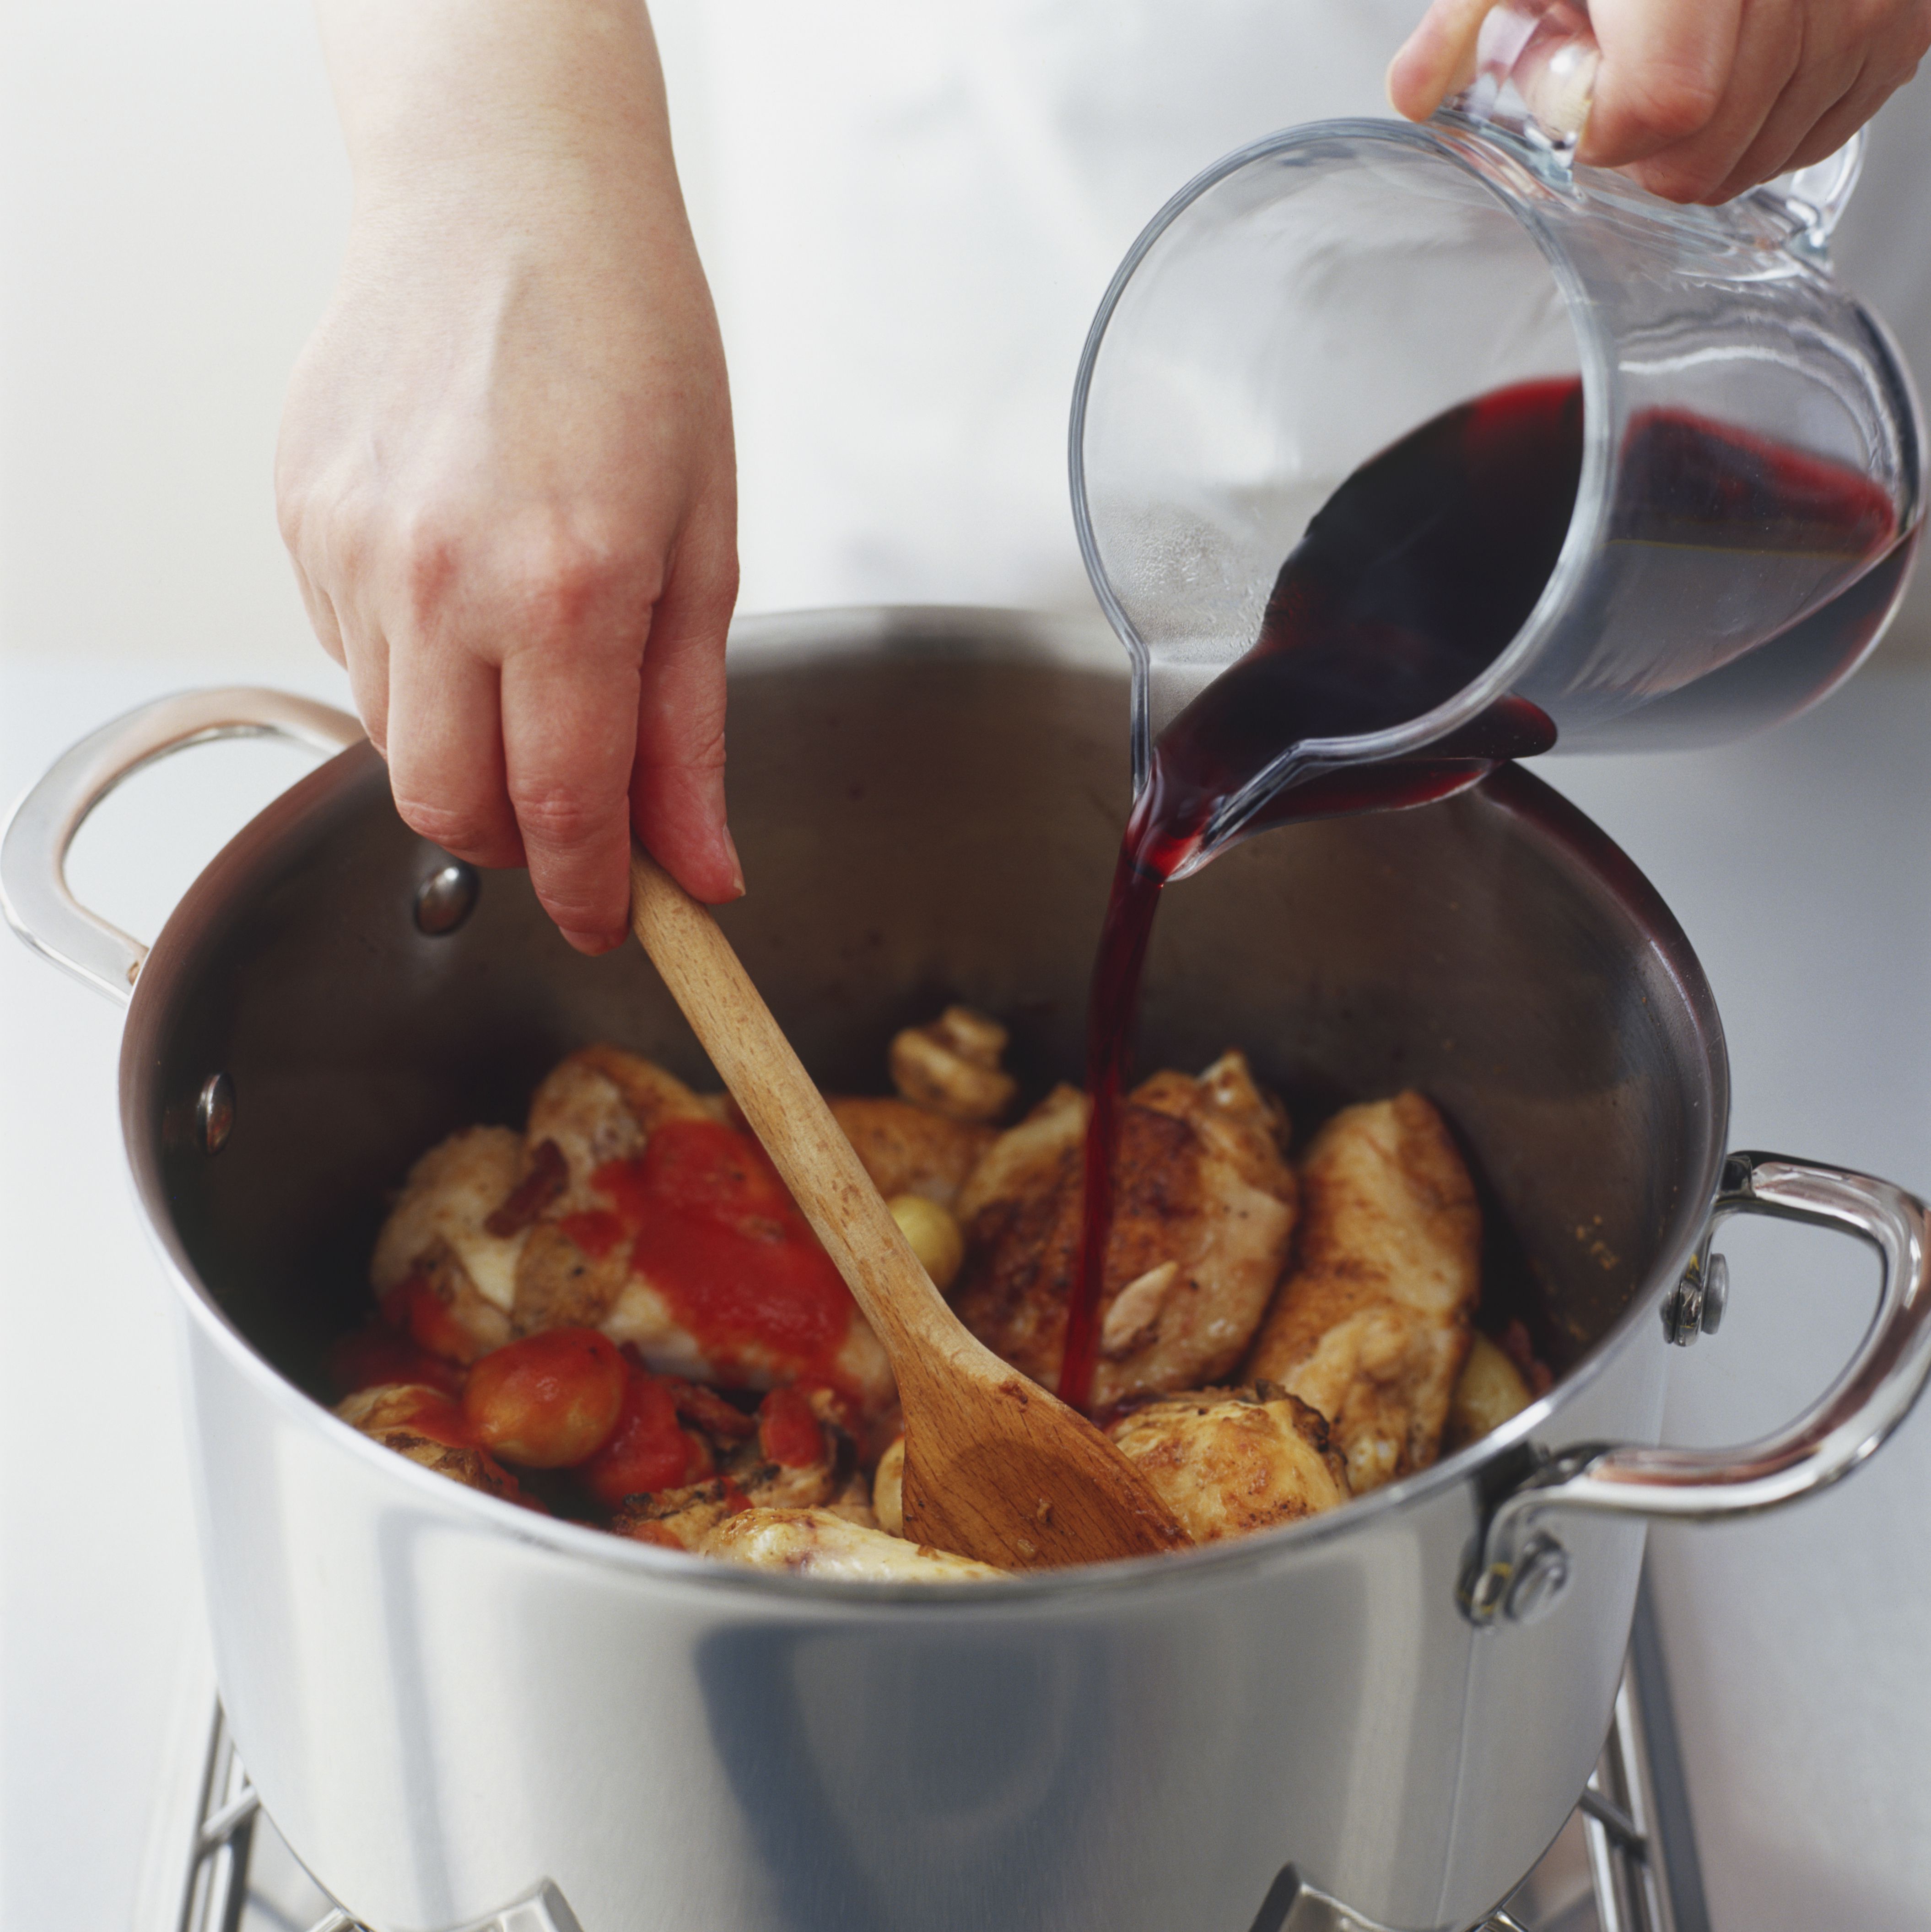 stirring-mixture-of-chicken-mushrooms-onions-bacon-and-tomato-passata-cooking-in-a-pot-and-adding-red-wine-to-it-75376542-581a12dc5f9b581c0b937ef5.jpg